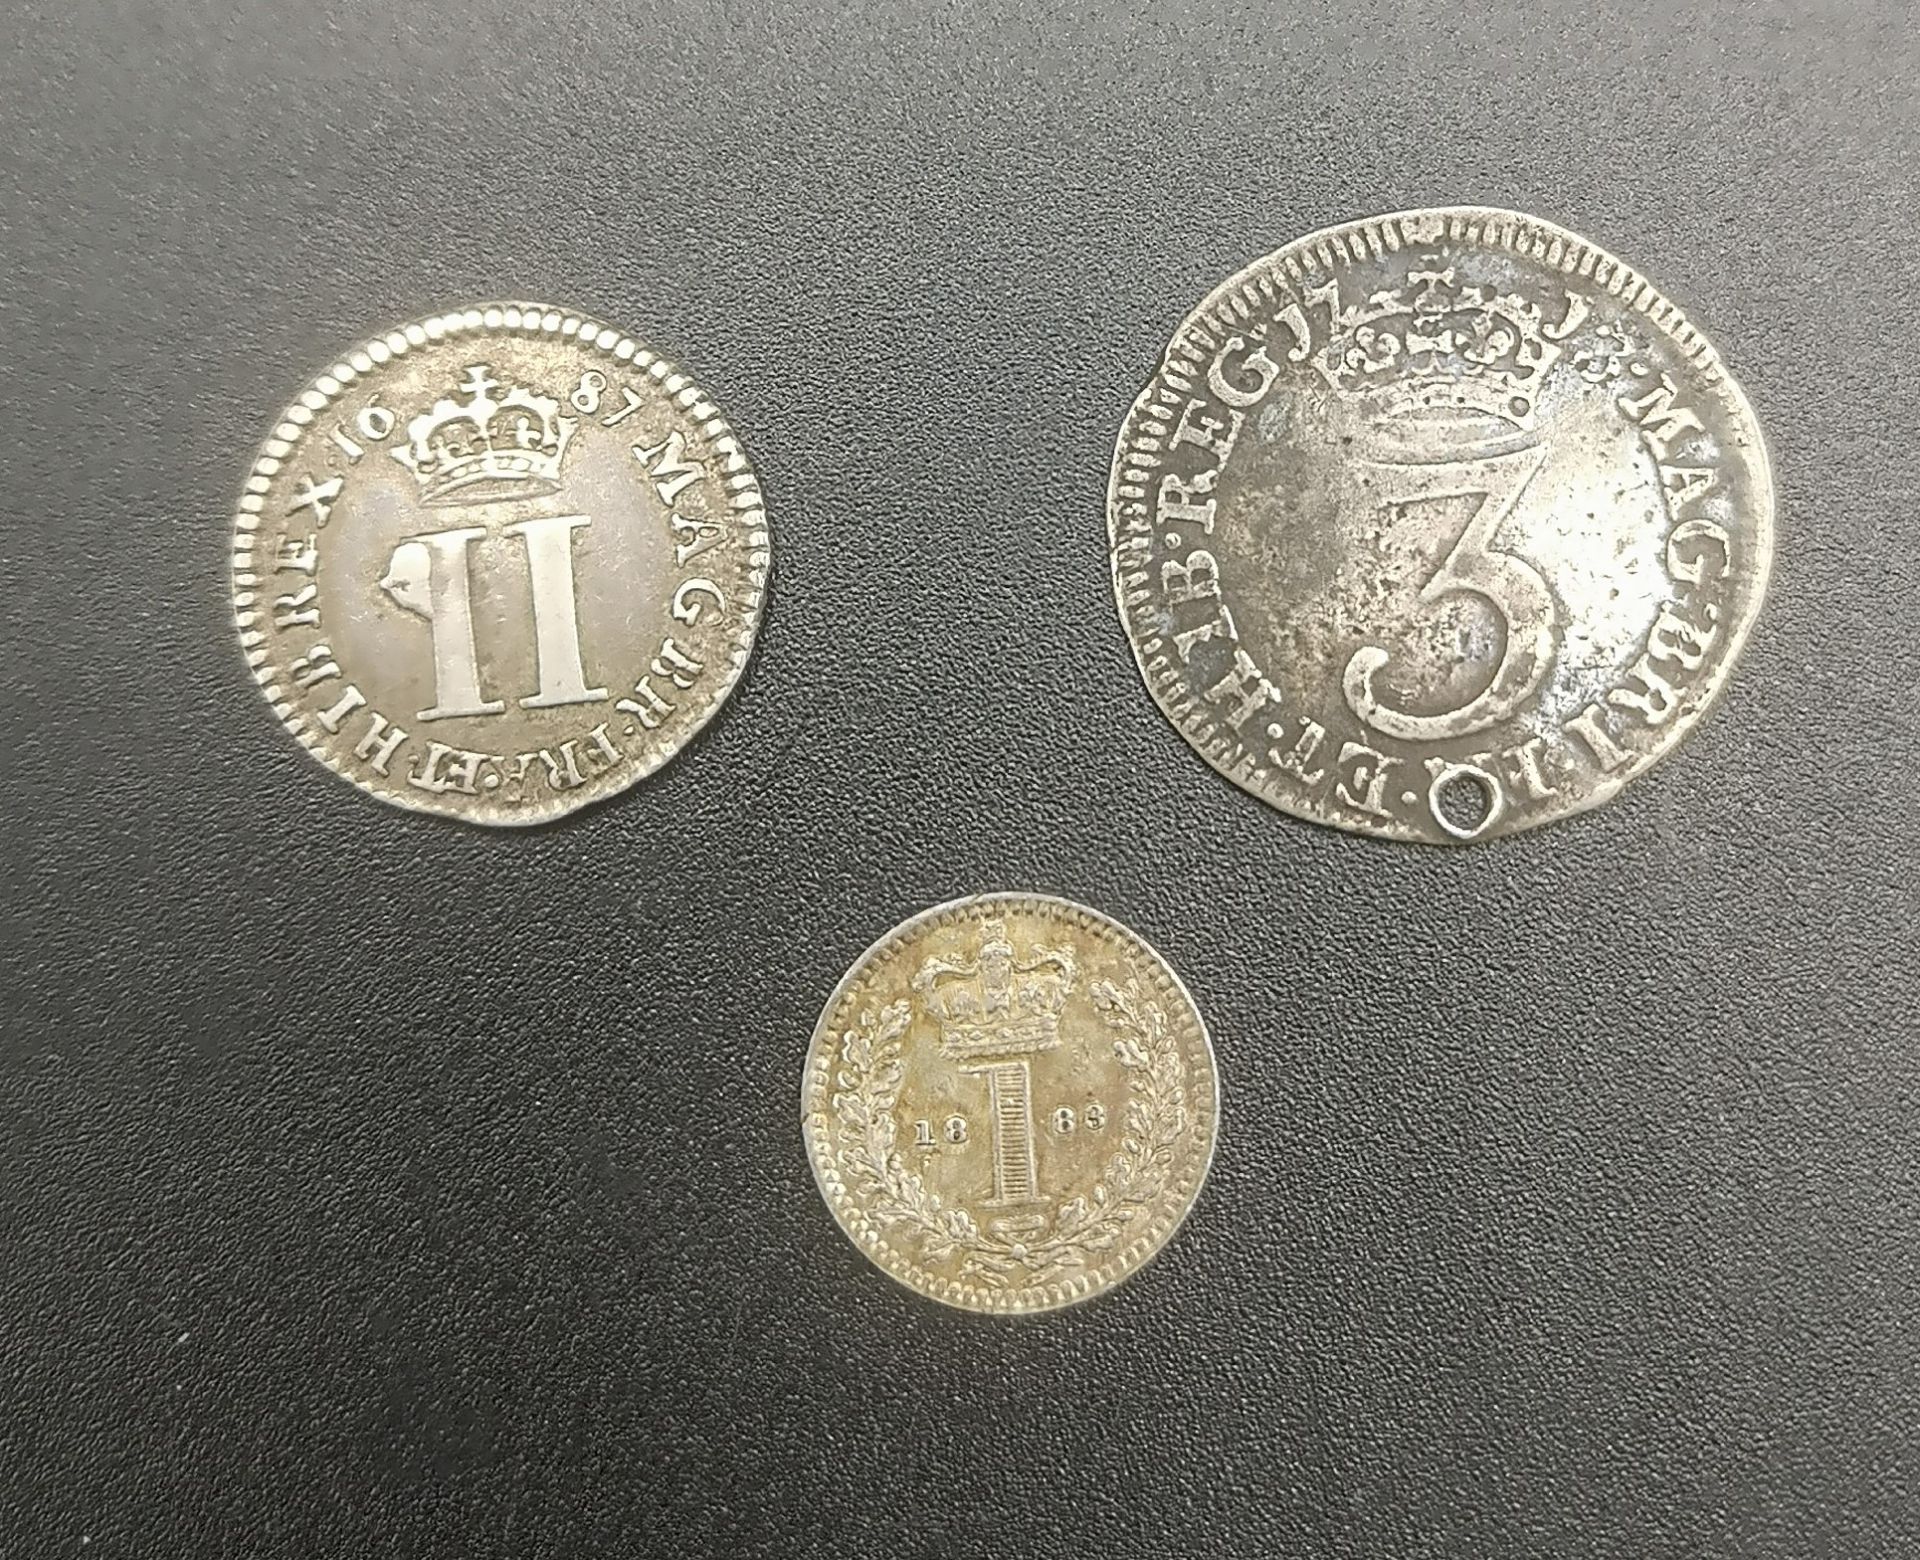 17th, 18th and 19th century Maundy coins